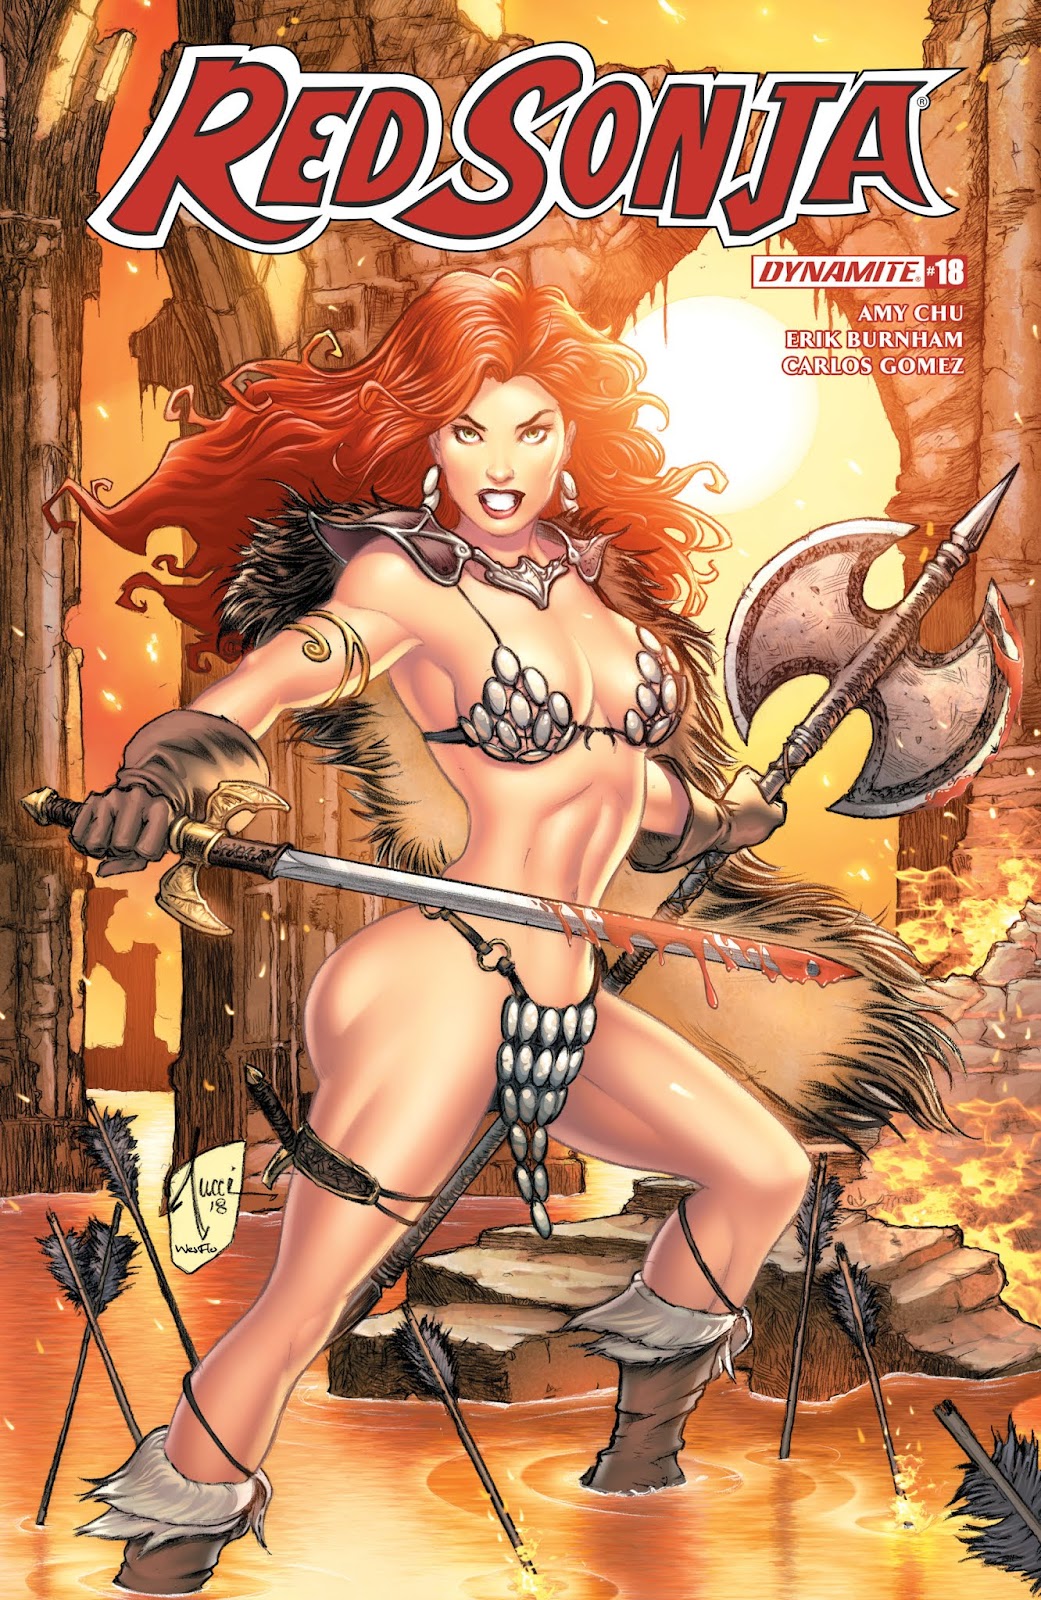 Red Sonja Vol. 4 issue 18 - Page 2